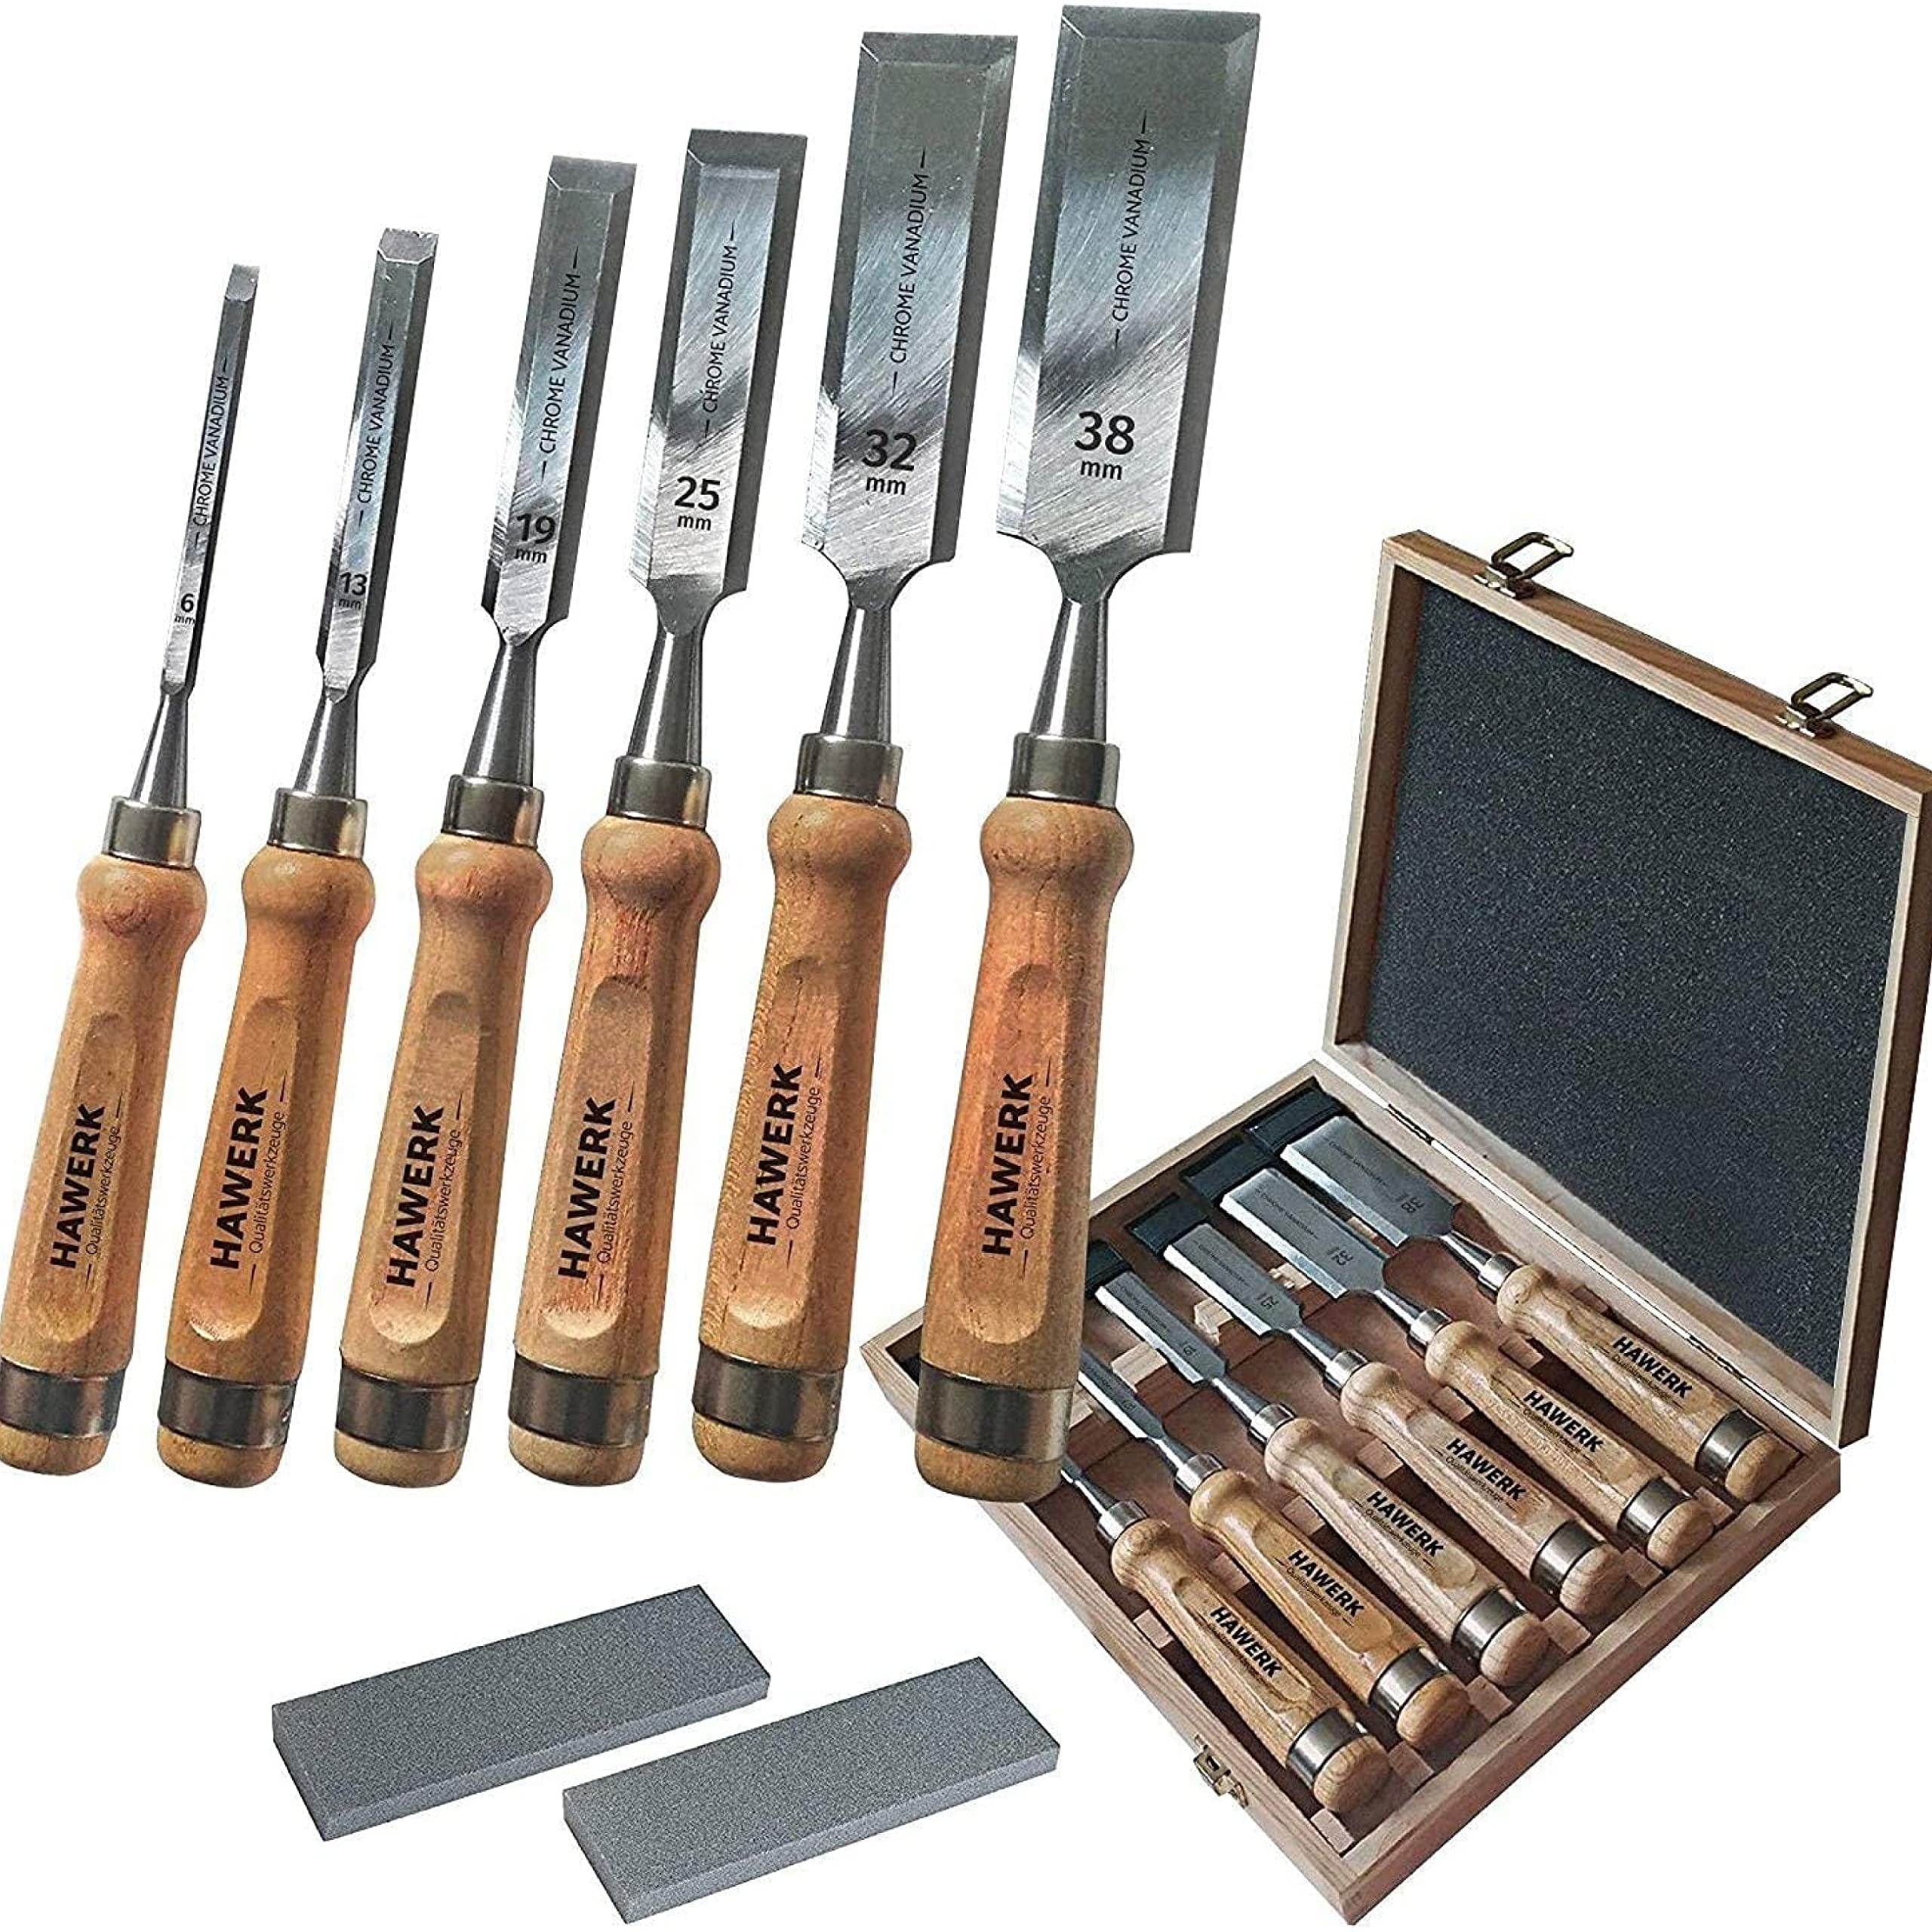 WOOD CARVING CHISEL SET KING Canada - Power Tools, Woodworking and